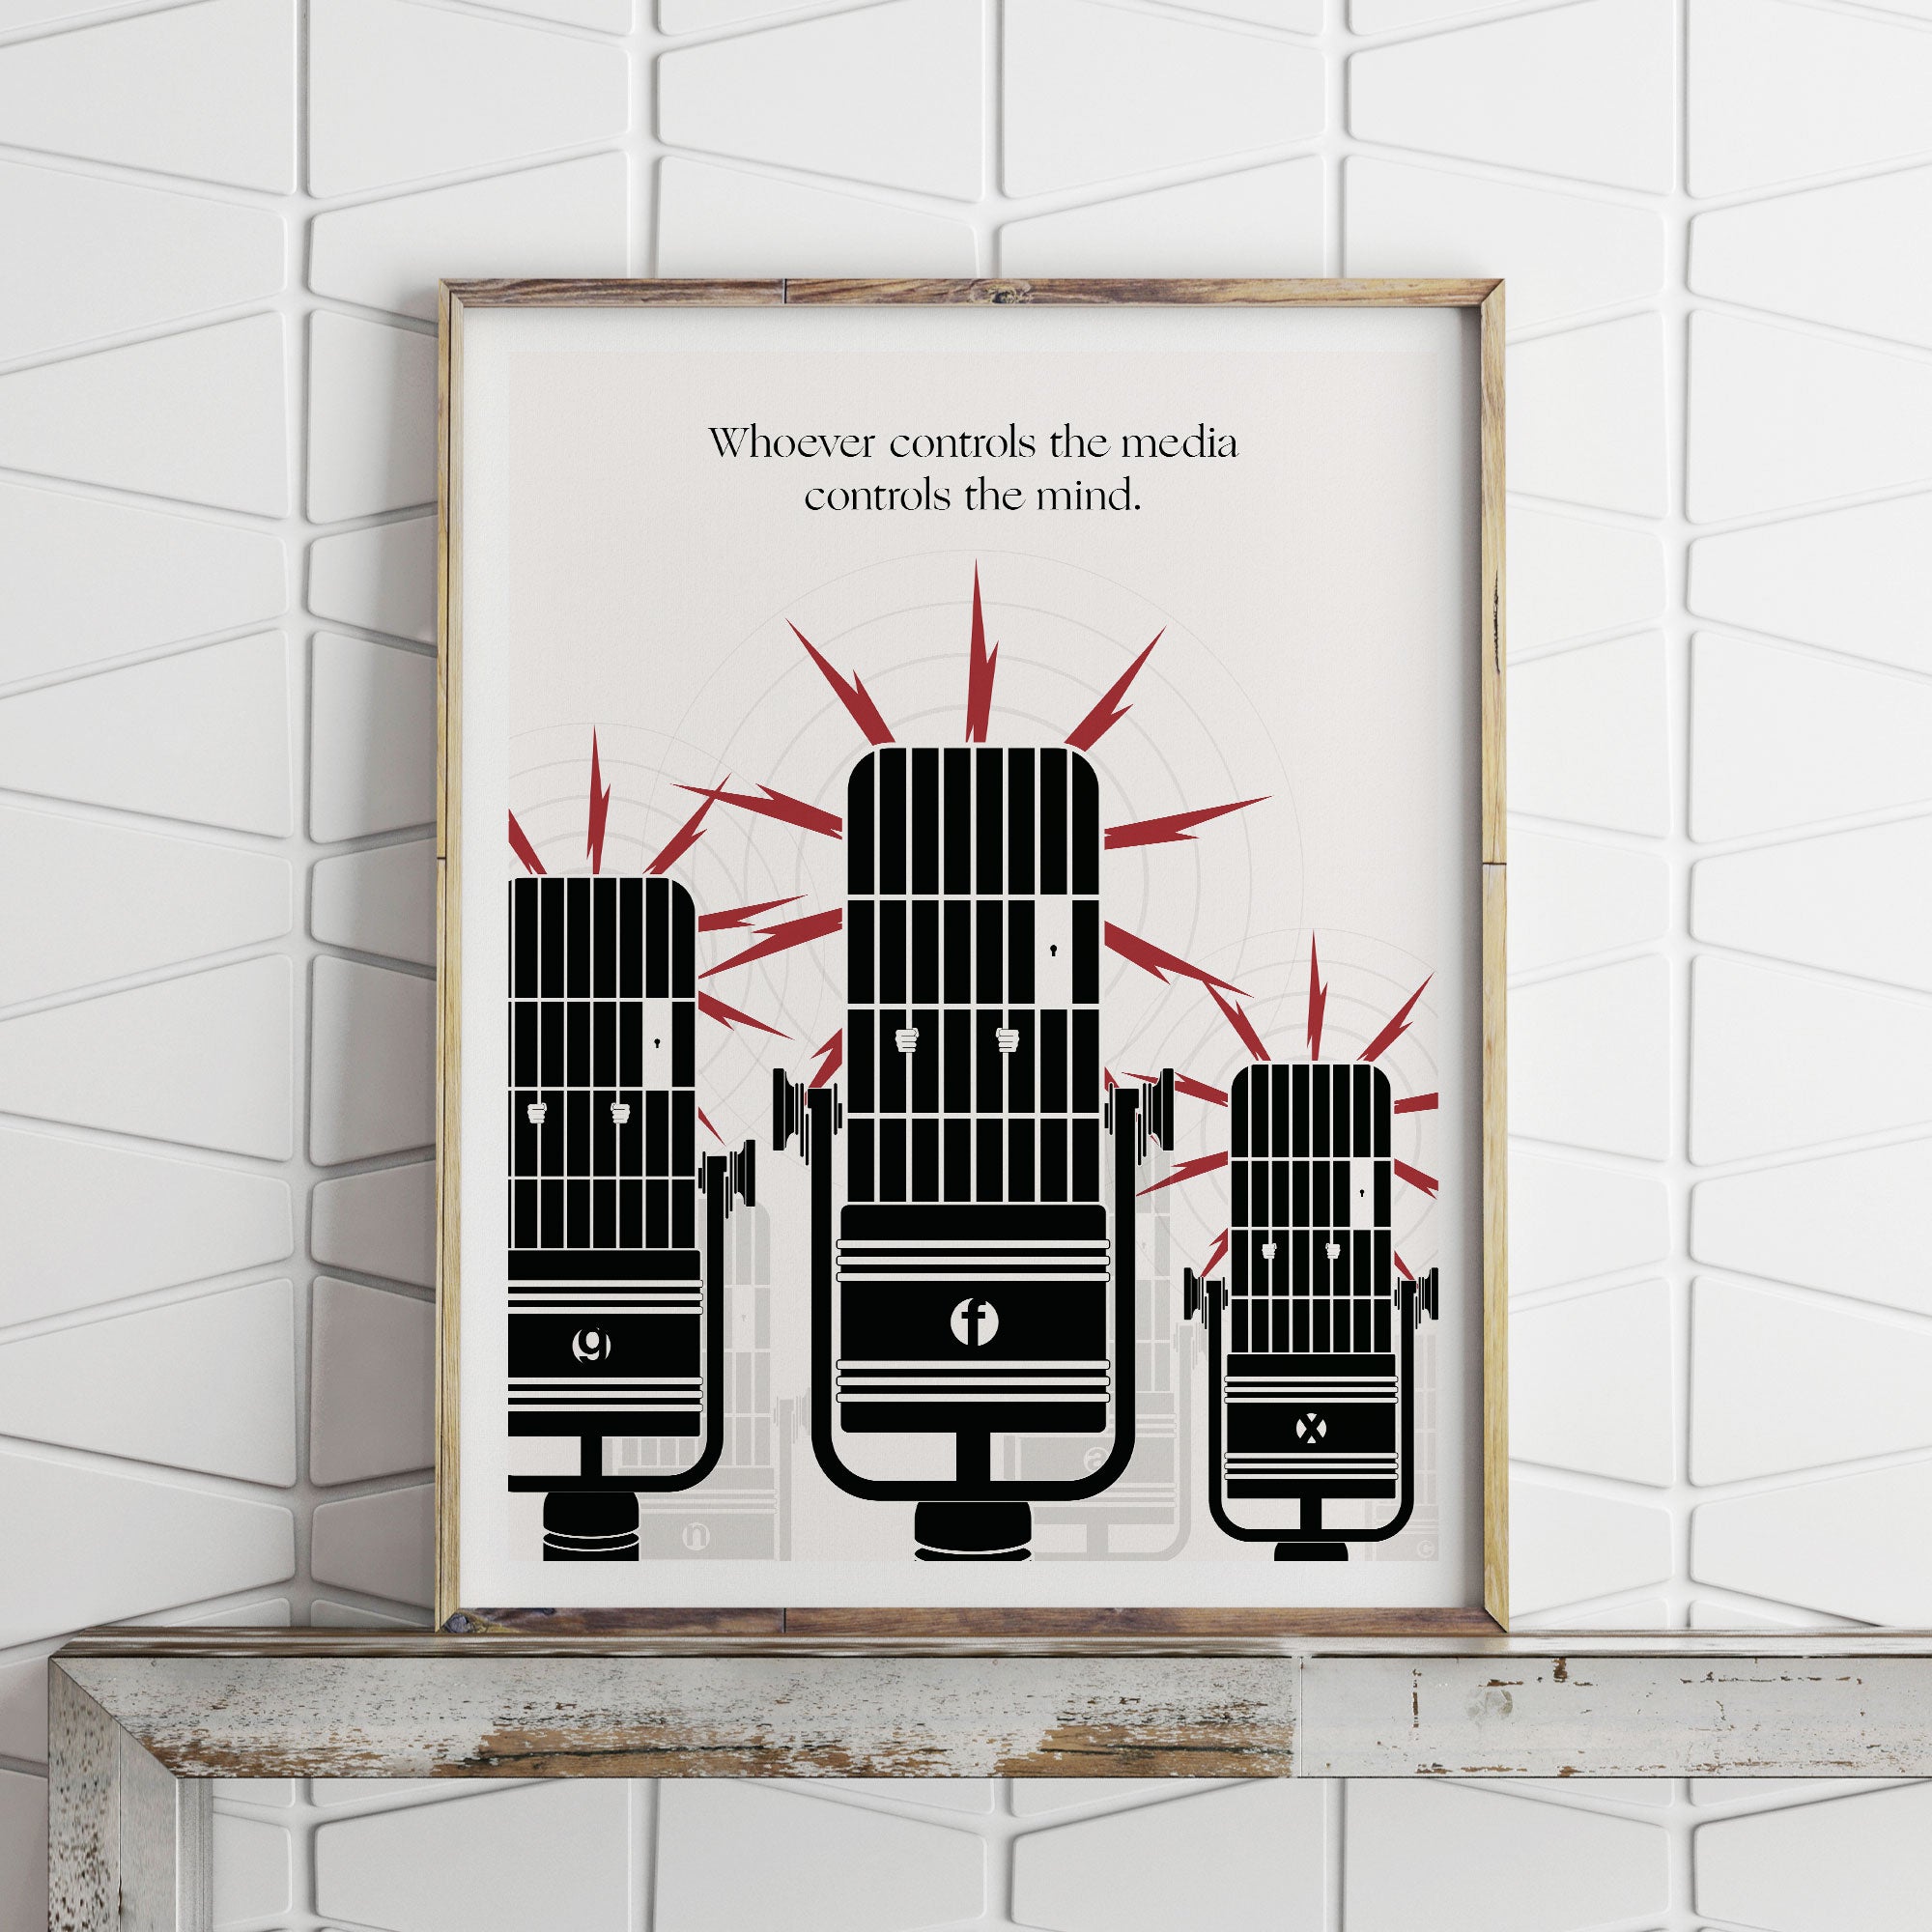 Whoever controls the media controls the mind (Custom Print)